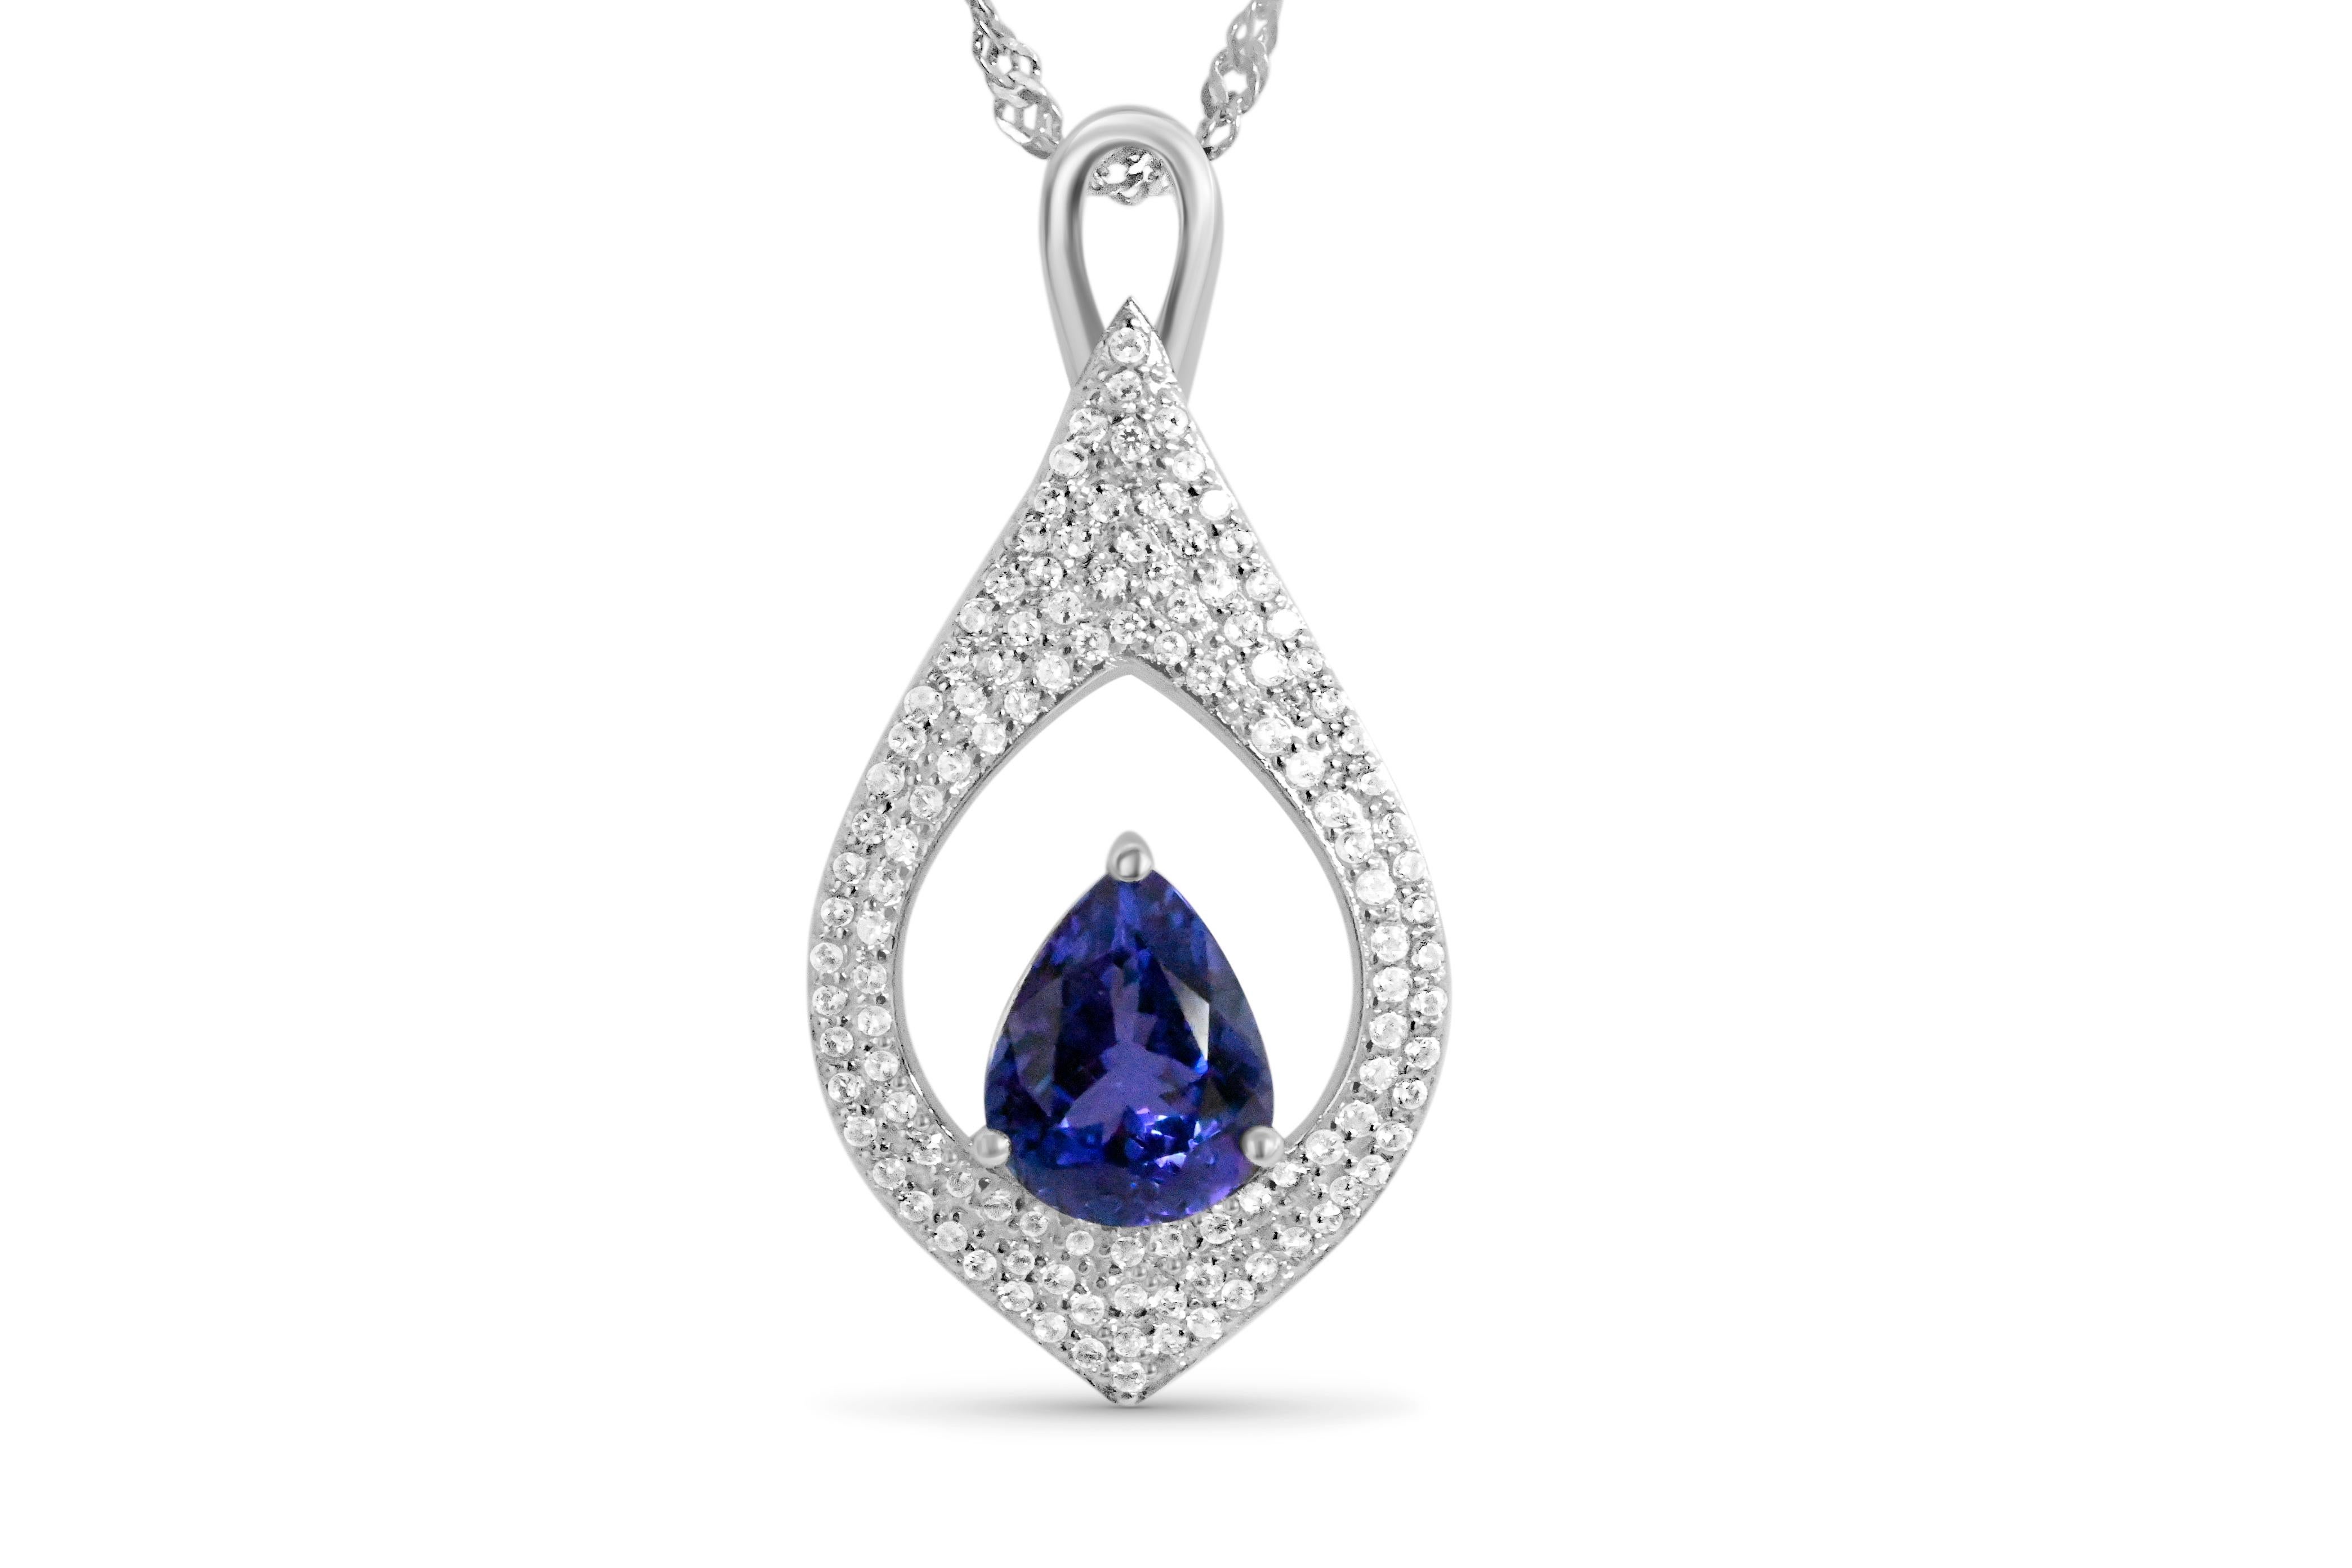 Tanzanite 925 Sterling Sliver Rhodium  Metal Platted Women's Pendant 2.30cts
Primary Stone: Tanzanite 
Stone shape : 10 x 8mm pear
Stone Weight : 2.30cts
Metal Weight : 2.83g

Secondary Stone : White CZ
No of Stone : 11 pieces